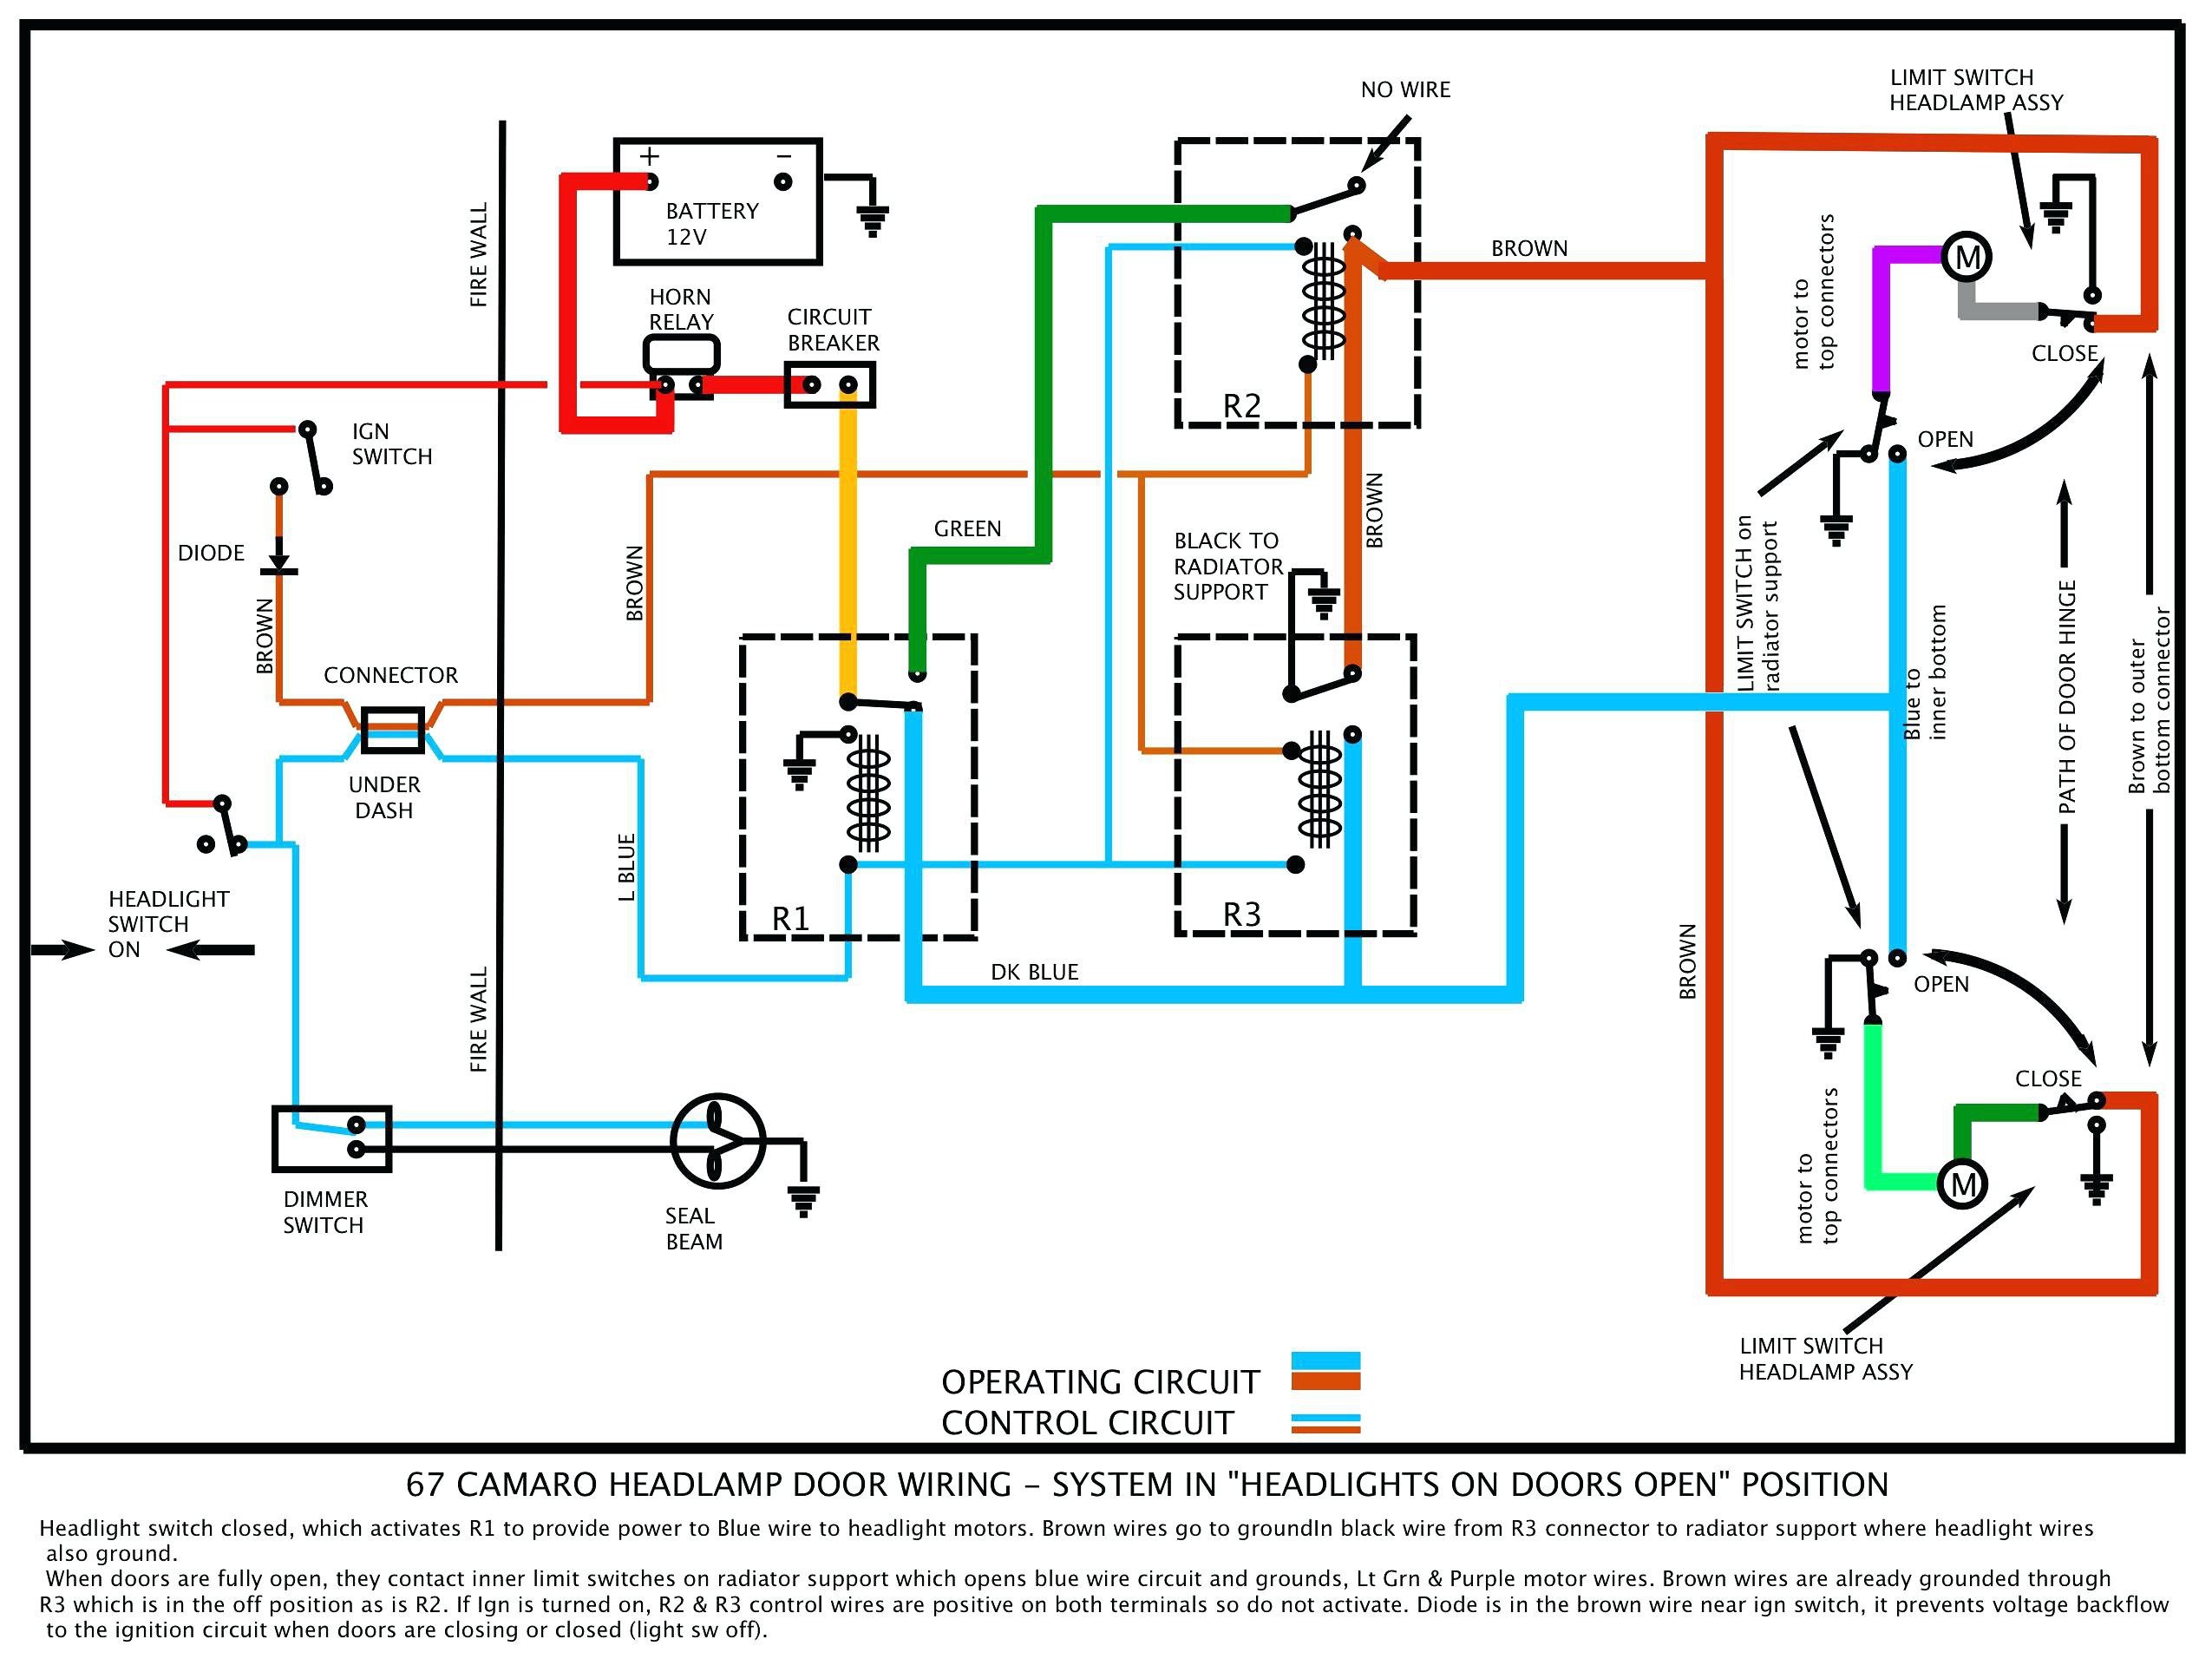 Full Size of 3 Wire Switch Wiring Maestro Way Dimmer Diagram Archived Wiring Diagram Category